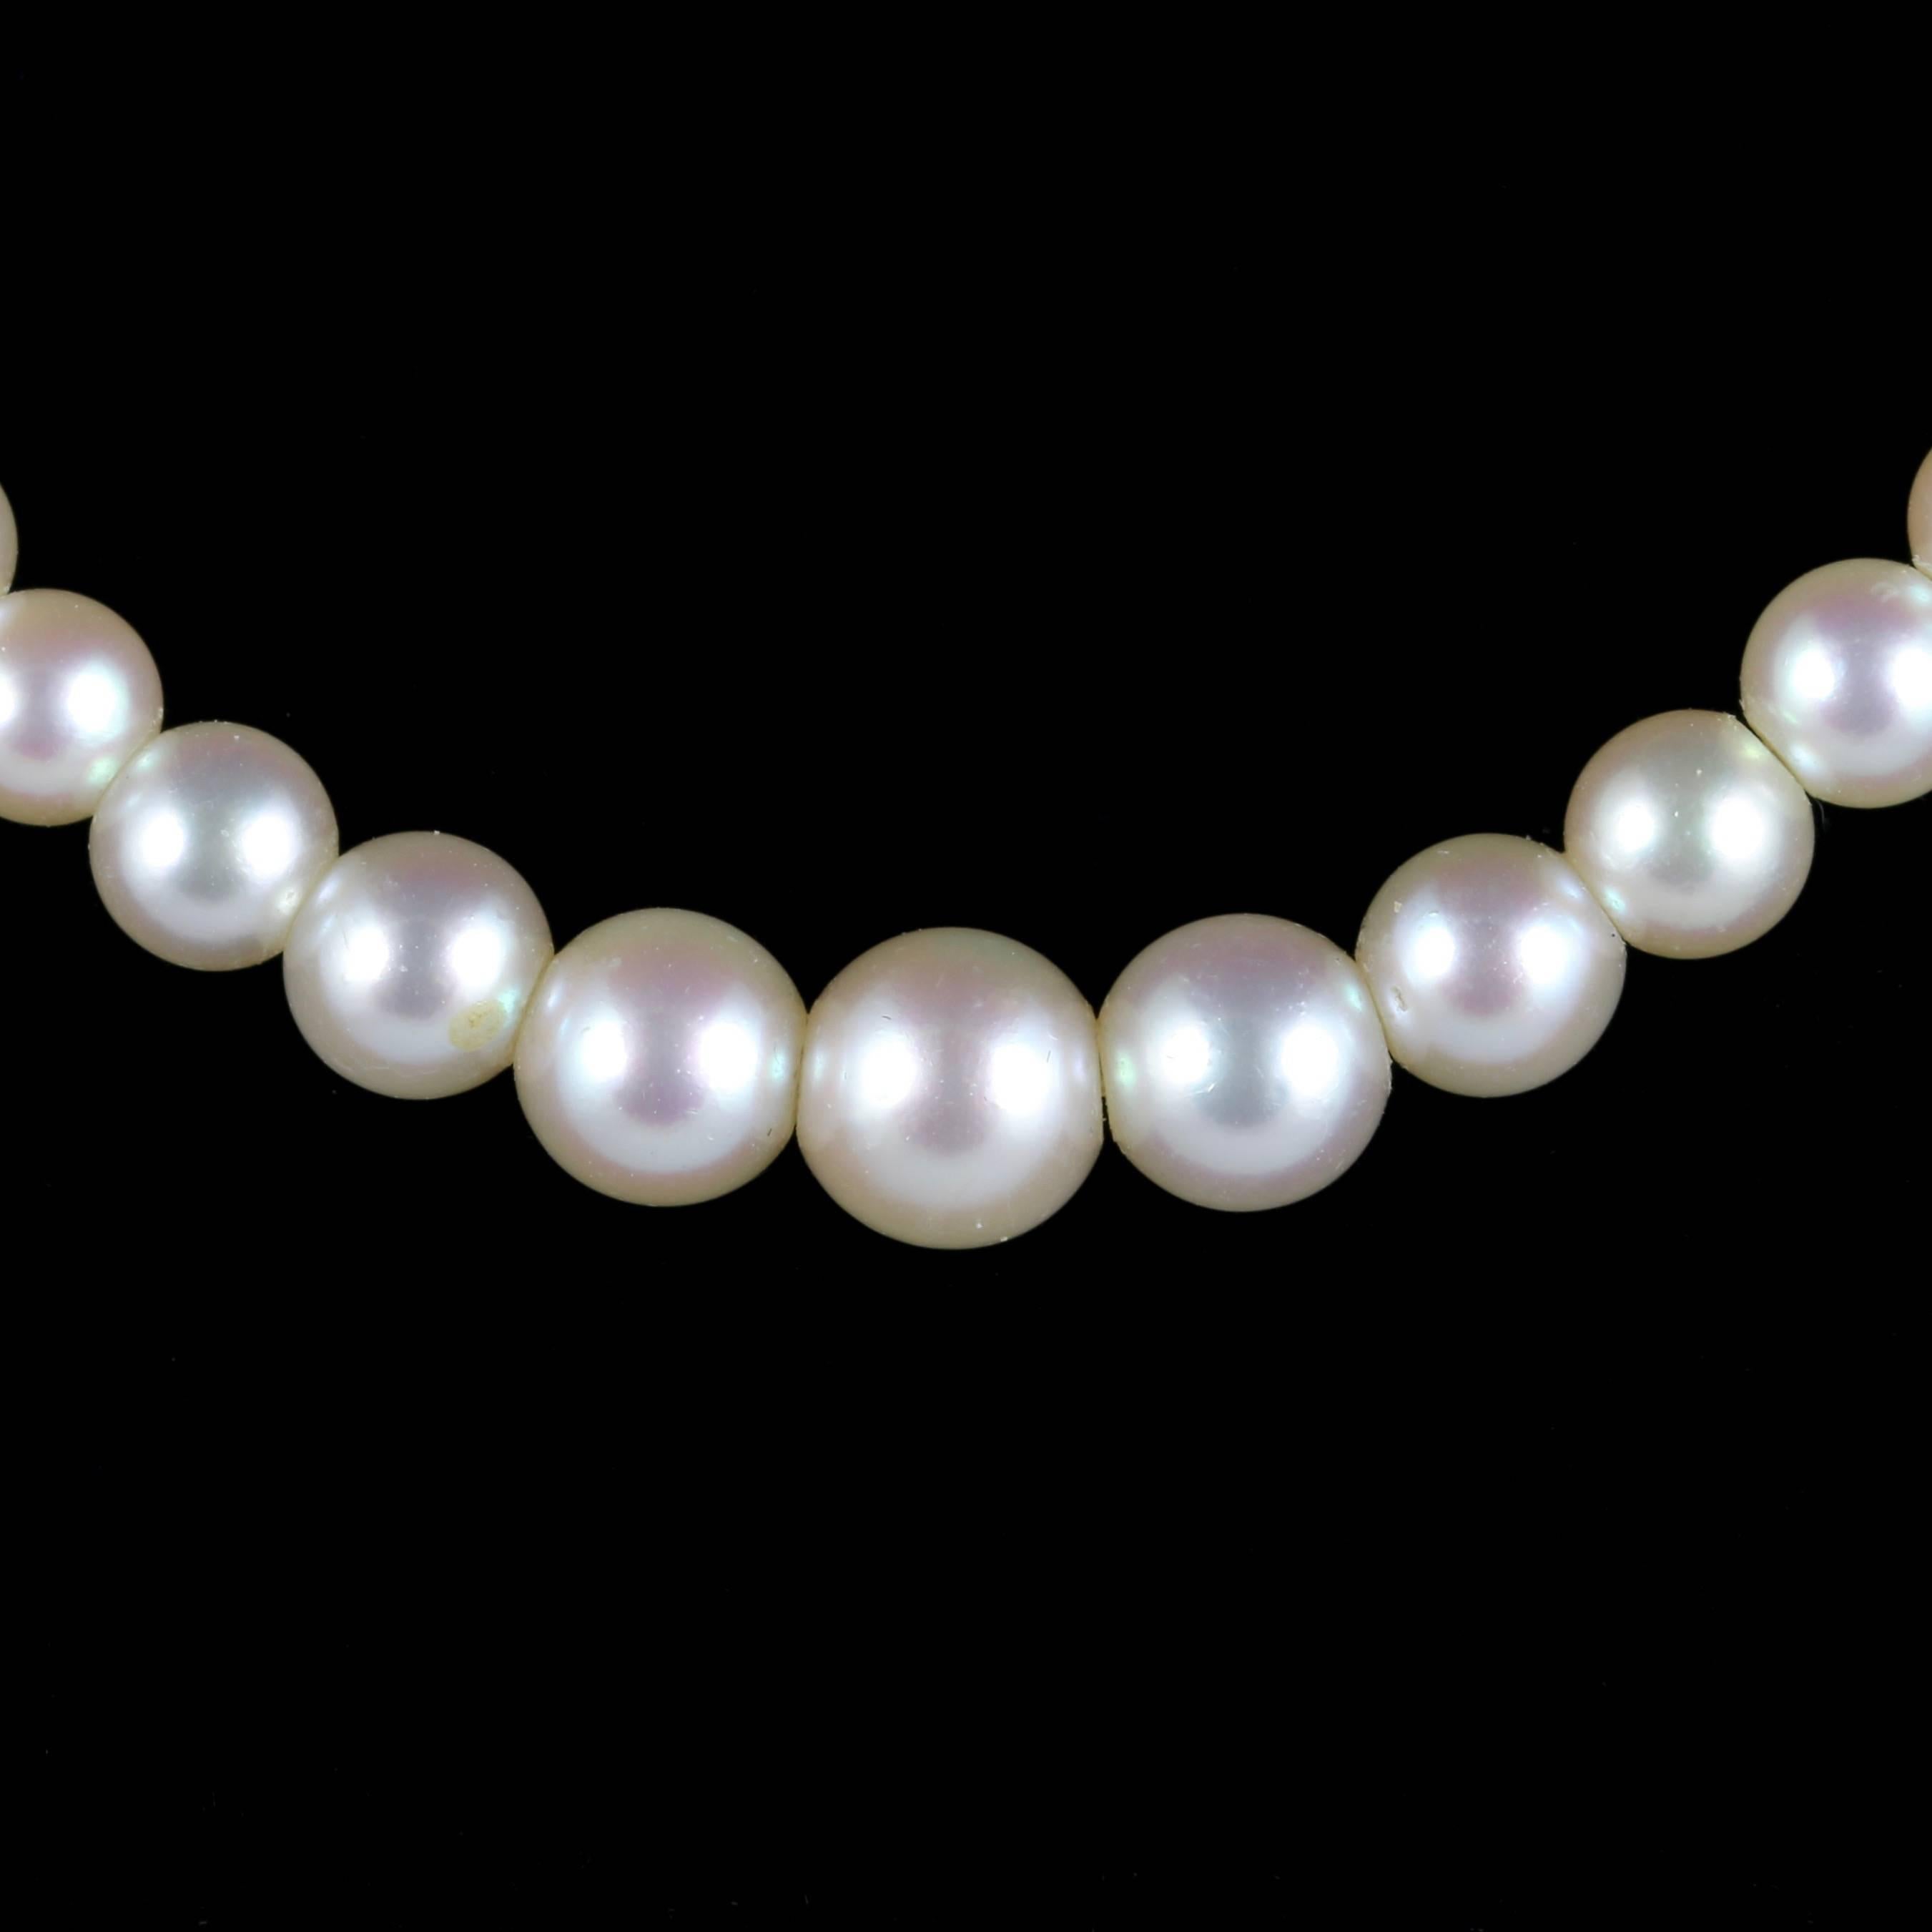 For more details please click continue reading down below...

This very beautiful Antique Victorian Pearl necklace is set with a lovely old cushion cut Diamond clasp.

The Pearls are beautifully graduated, the largest Pearl measuring 6mm and the